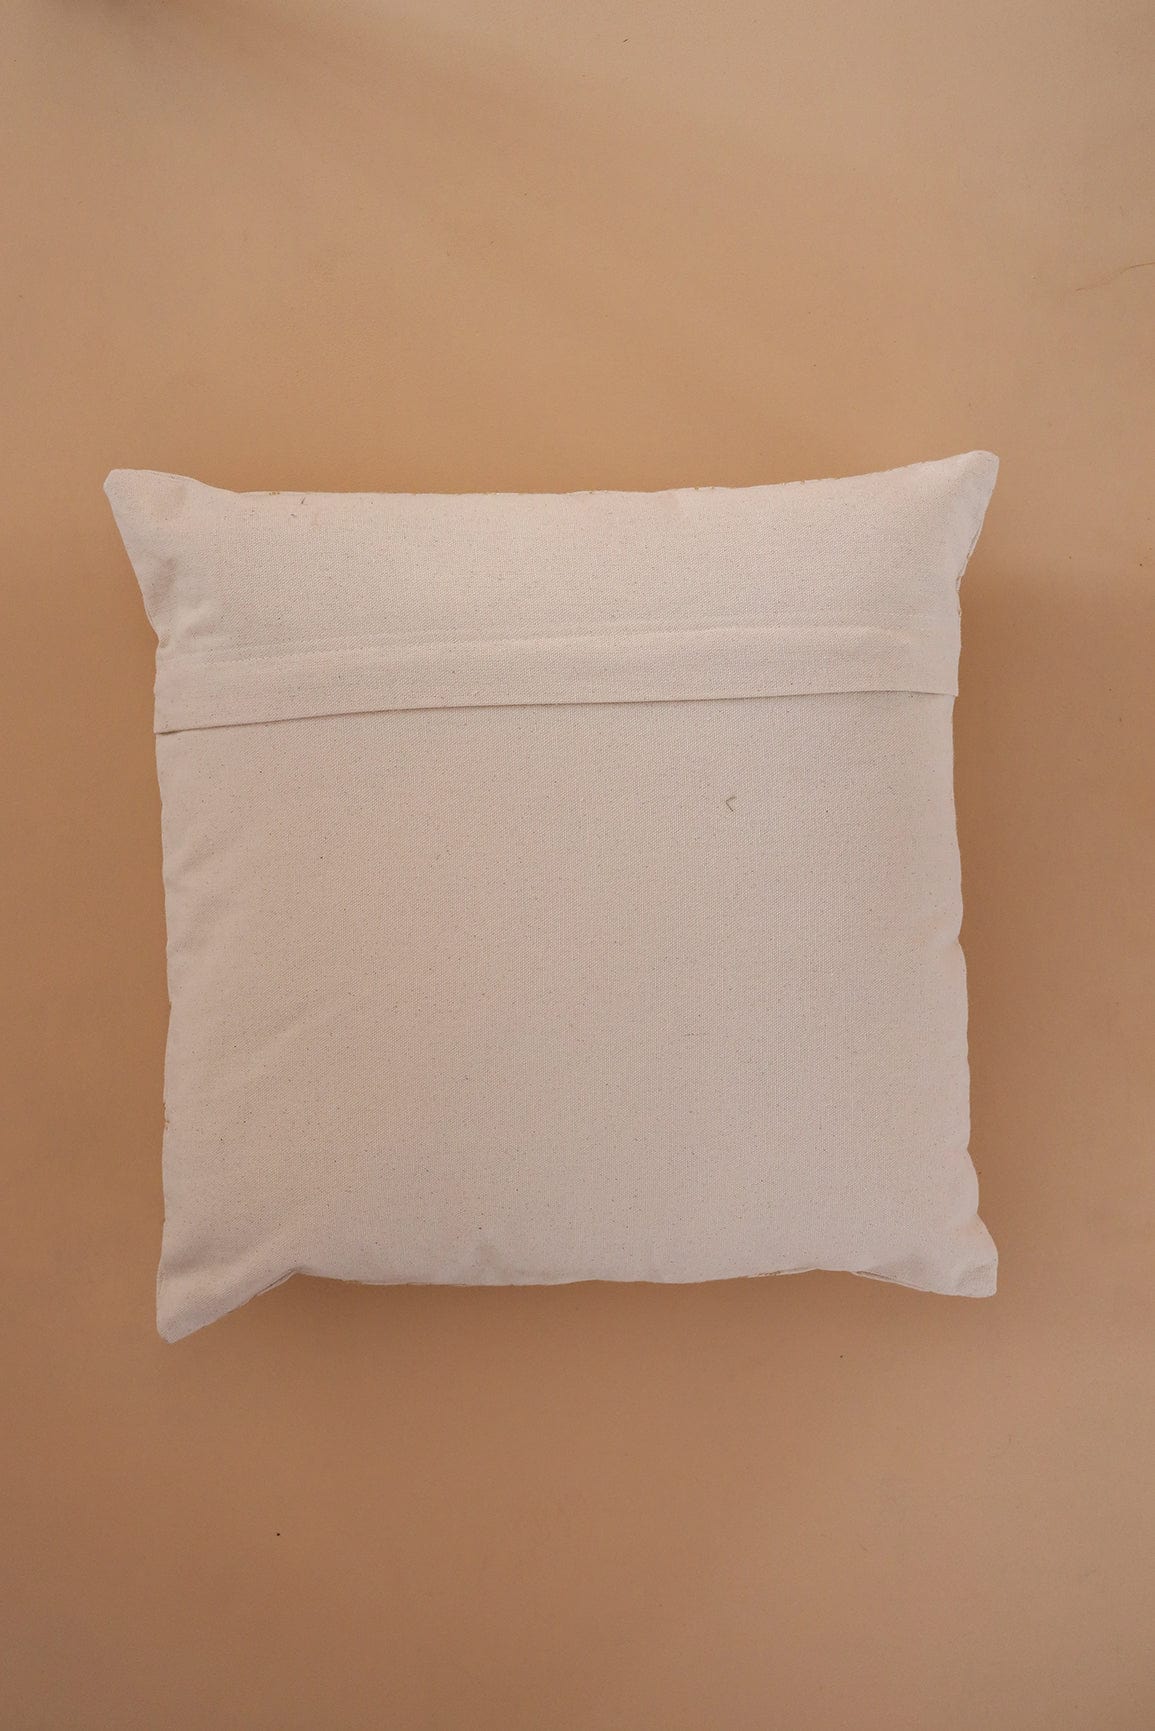 doeraa Gold Embroidery on off white cotton Cushion Cover (16*16 inches)